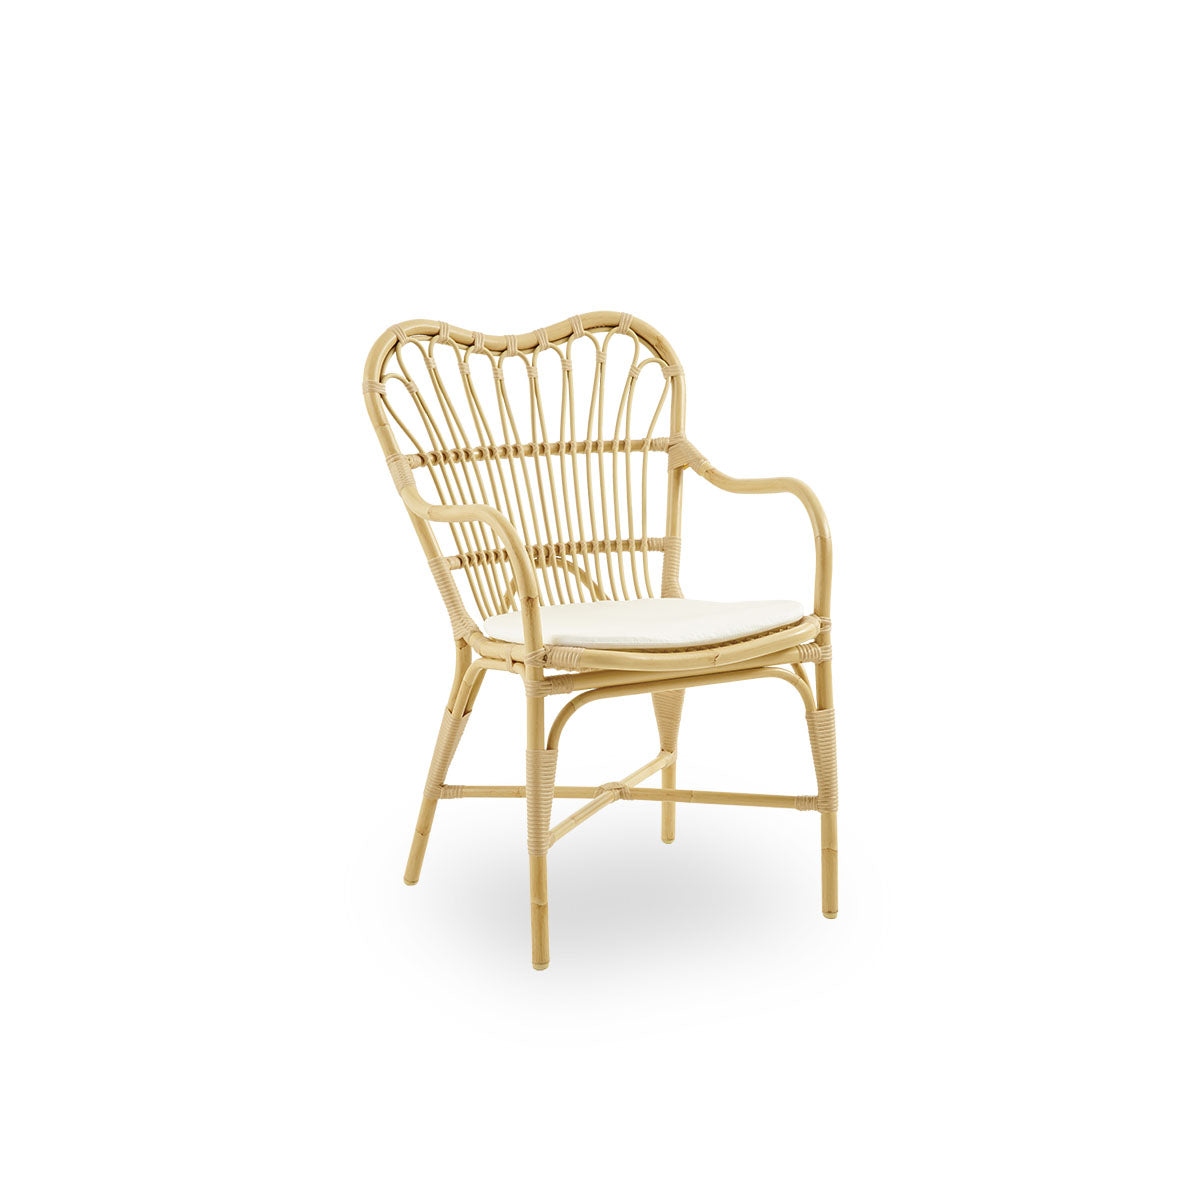 Seat cushion | Margret Exterior Dining Chair